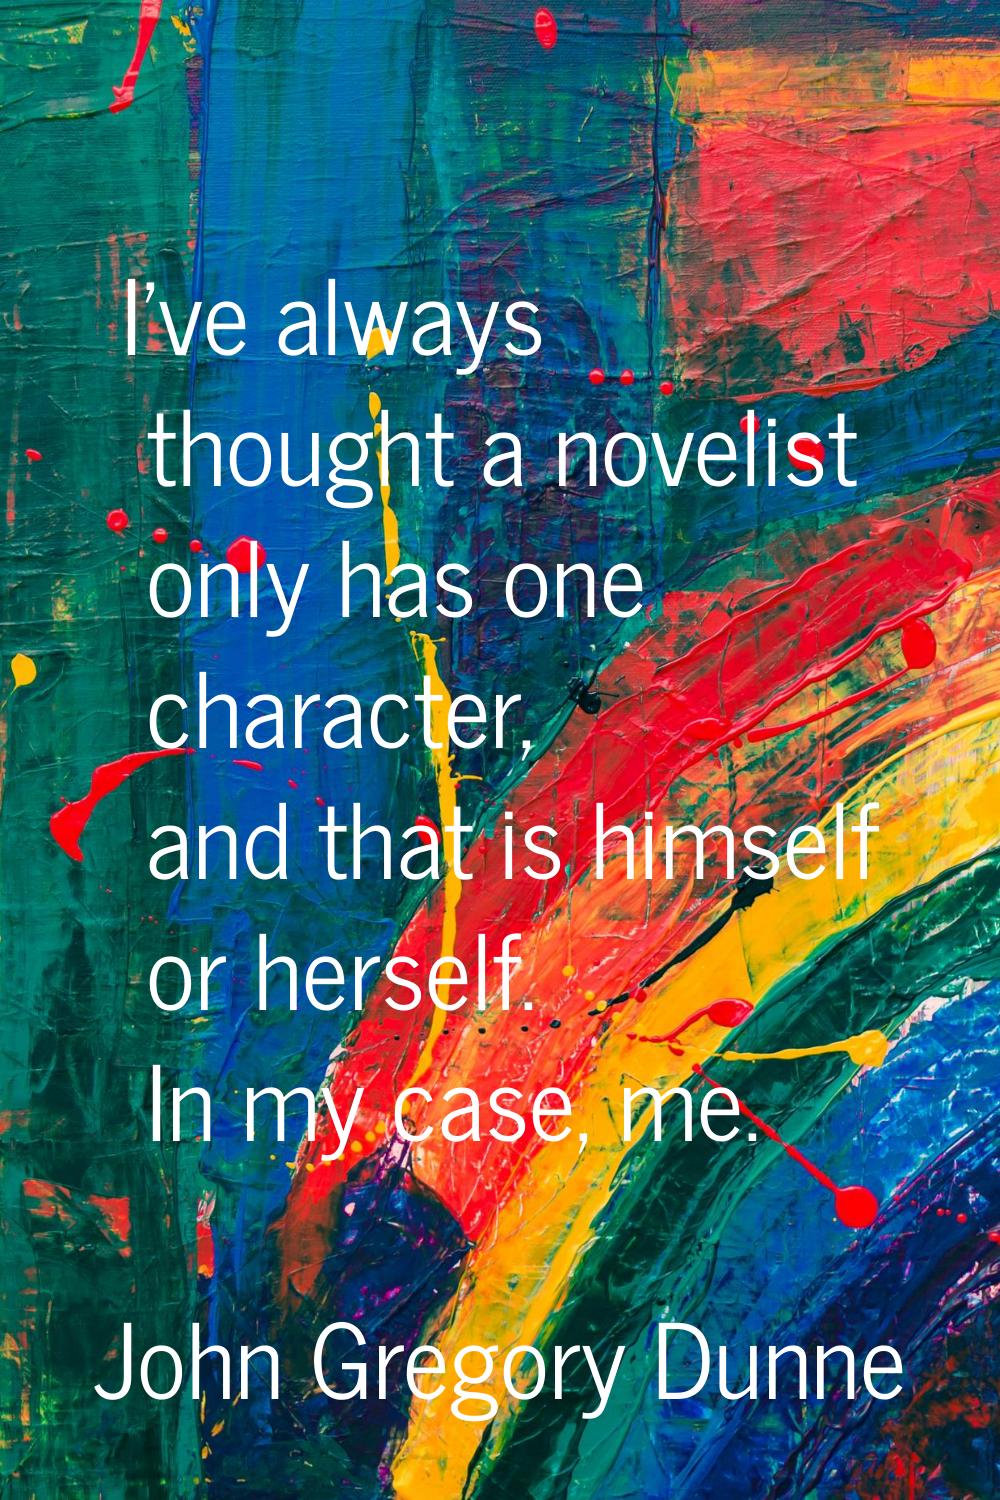 I've always thought a novelist only has one character, and that is himself or herself. In my case, 